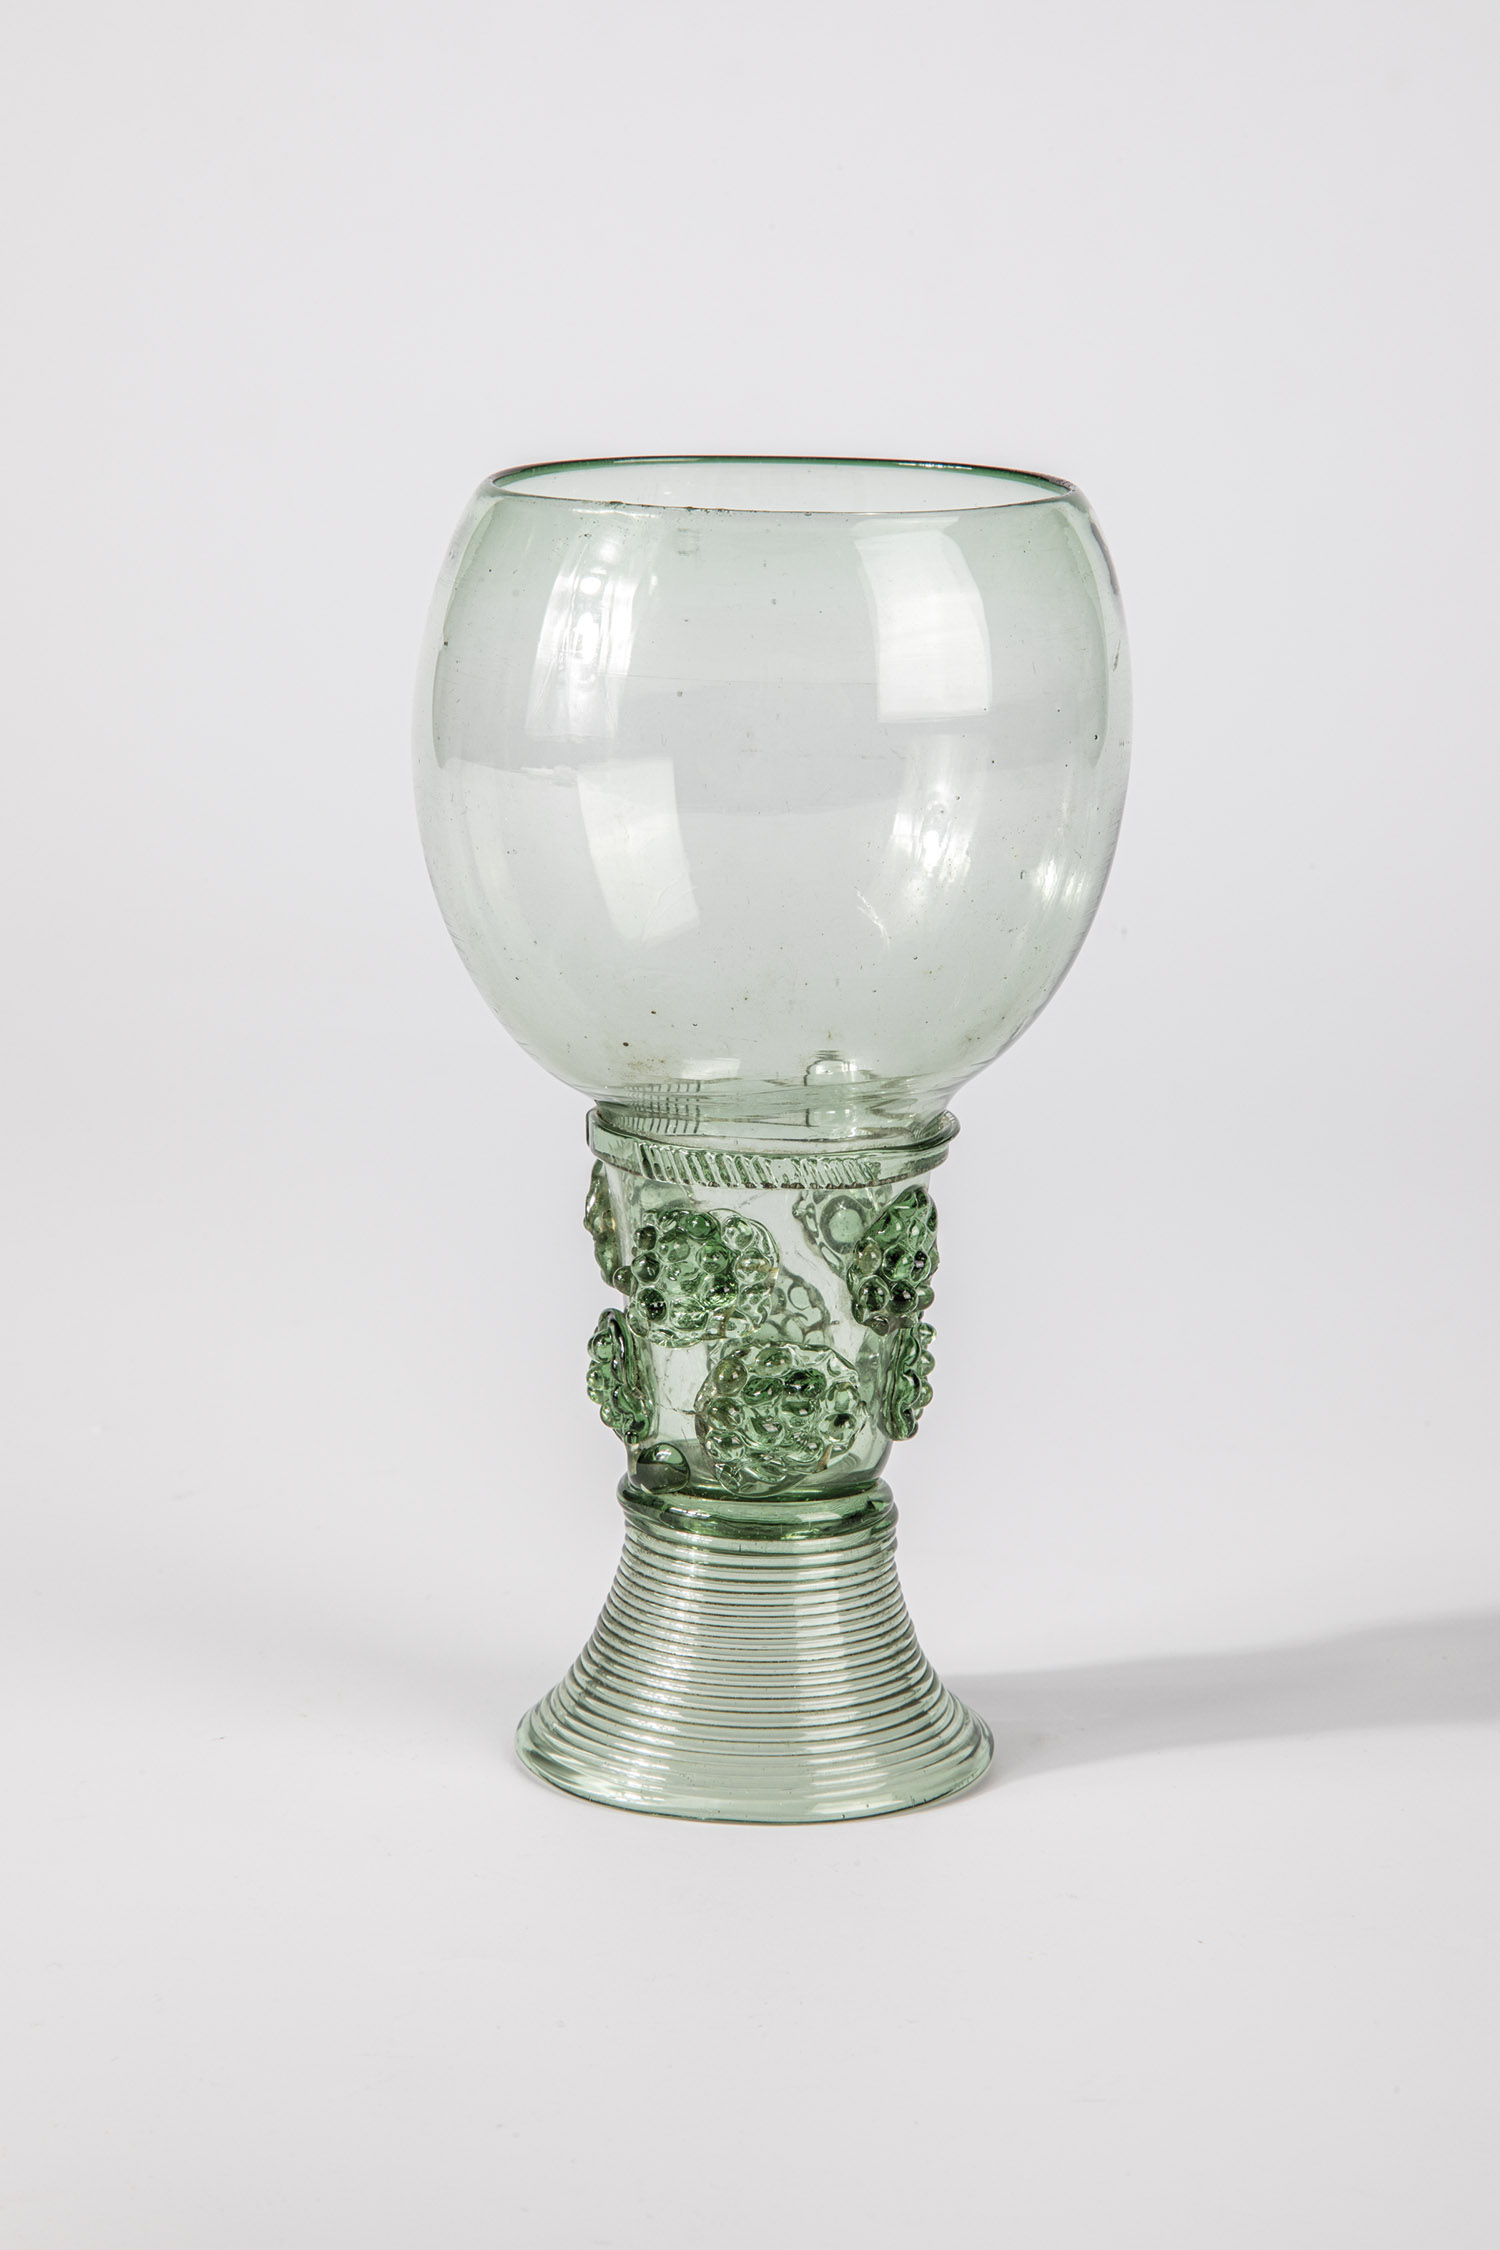 Roman German or Netherlands, 17th century Light green glass with spun base, raised bottom with tear,